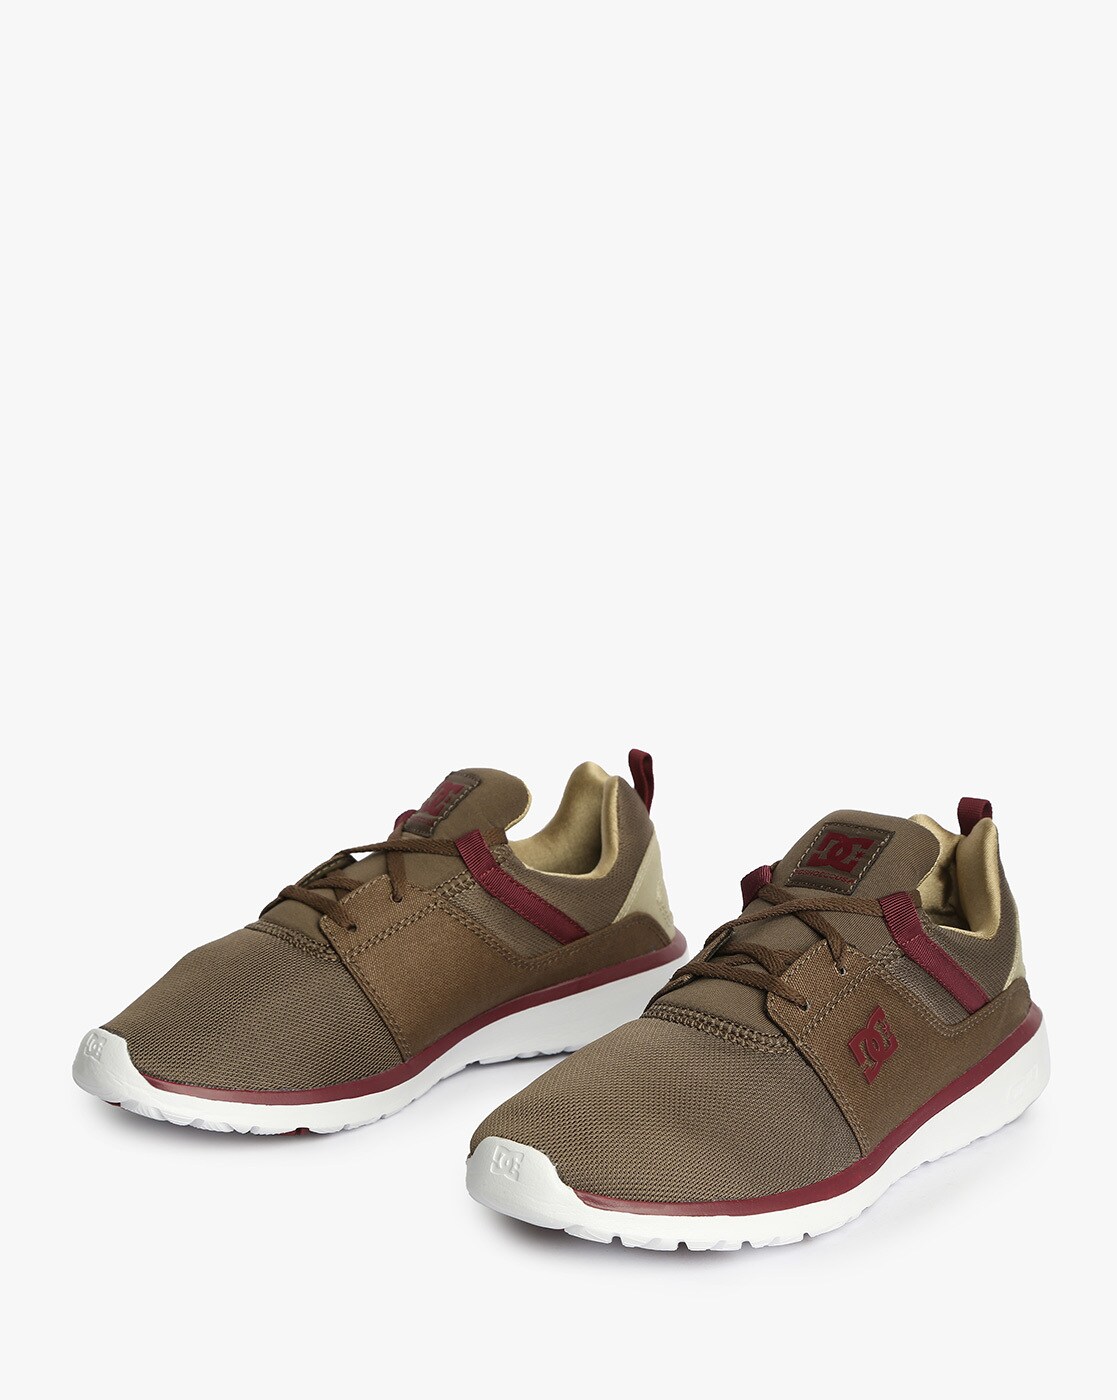 Buy Olive Green Casual Shoes for Men by DC Shoes Online 